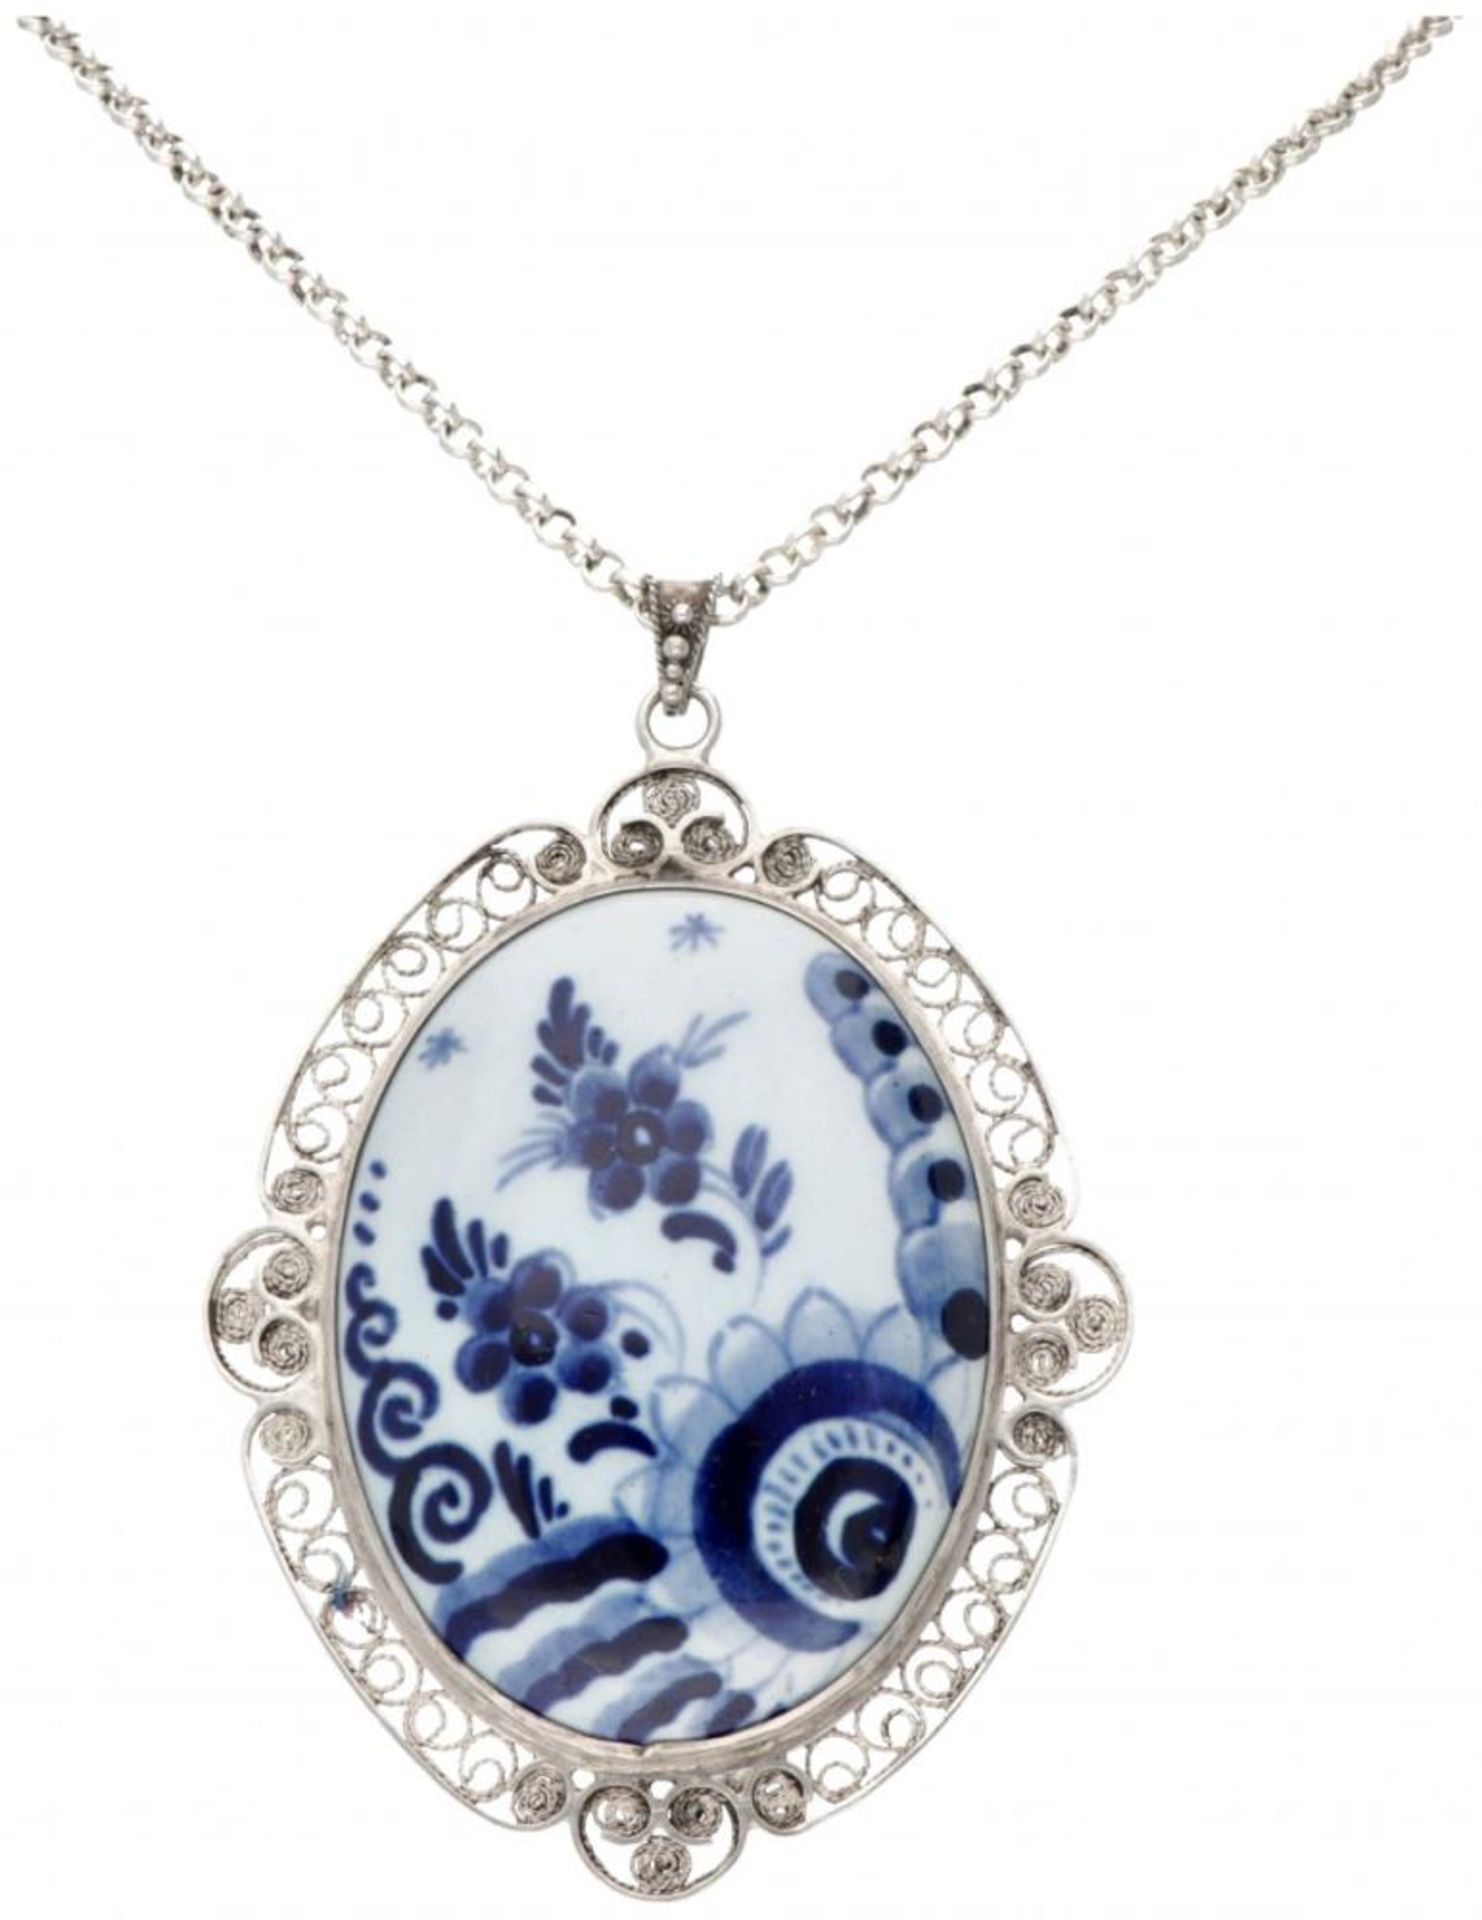 Sterling silver necklace and vintage filigree pendant with Delft blue ceramic.